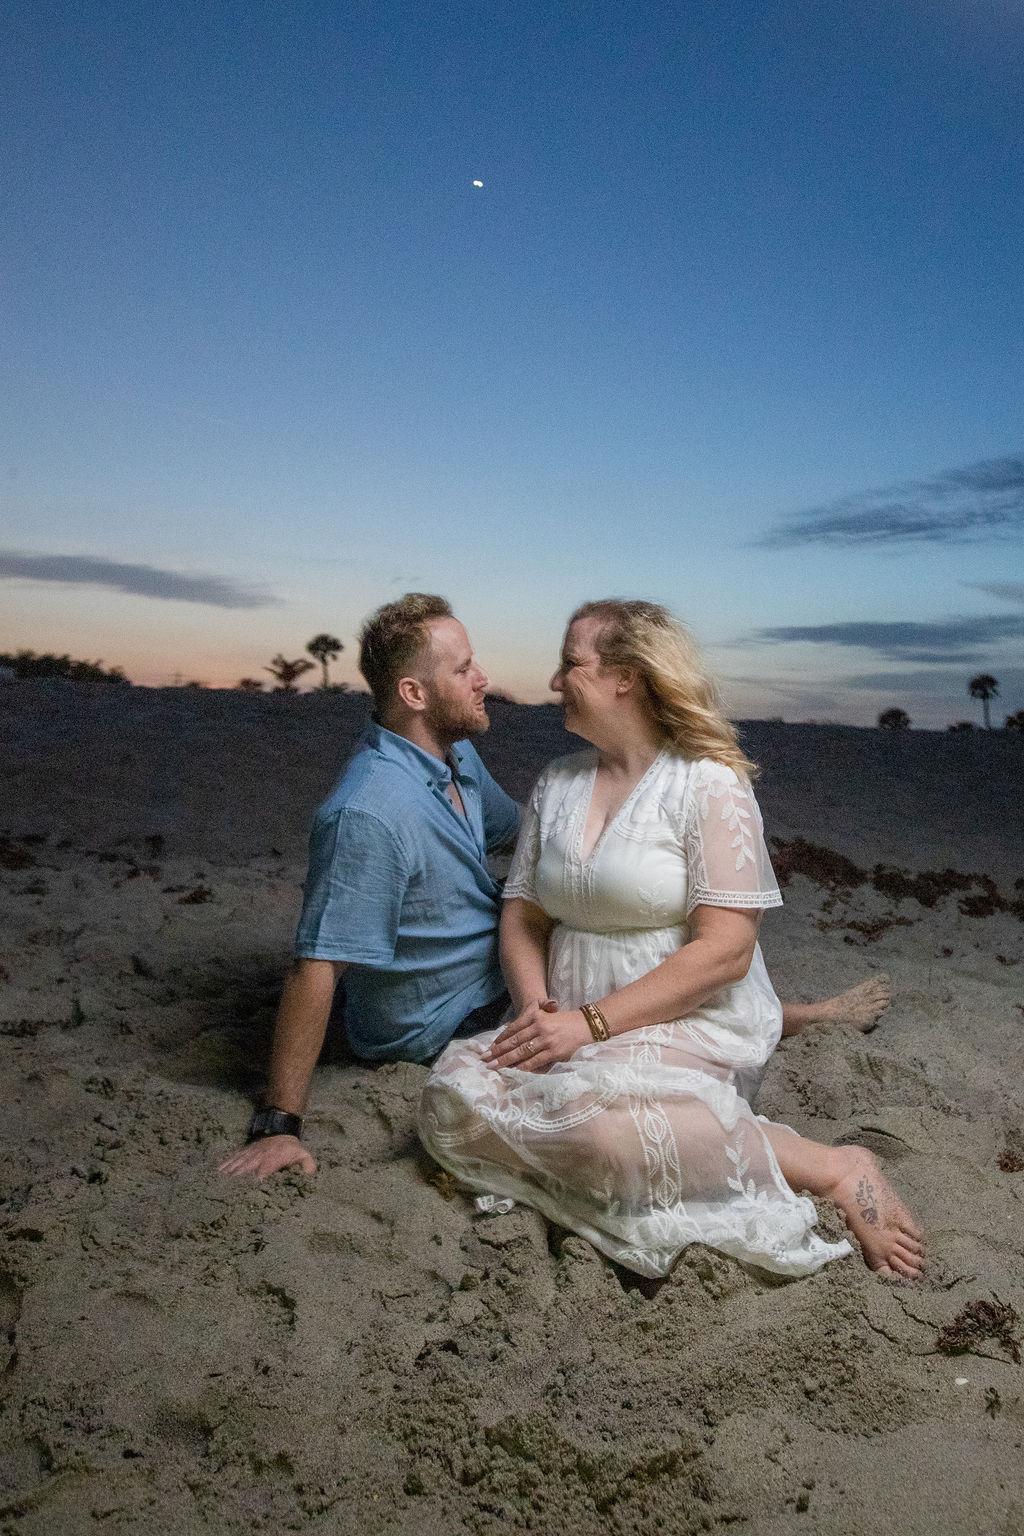 The Wedding Website of Christy Barber and Brett Wessel